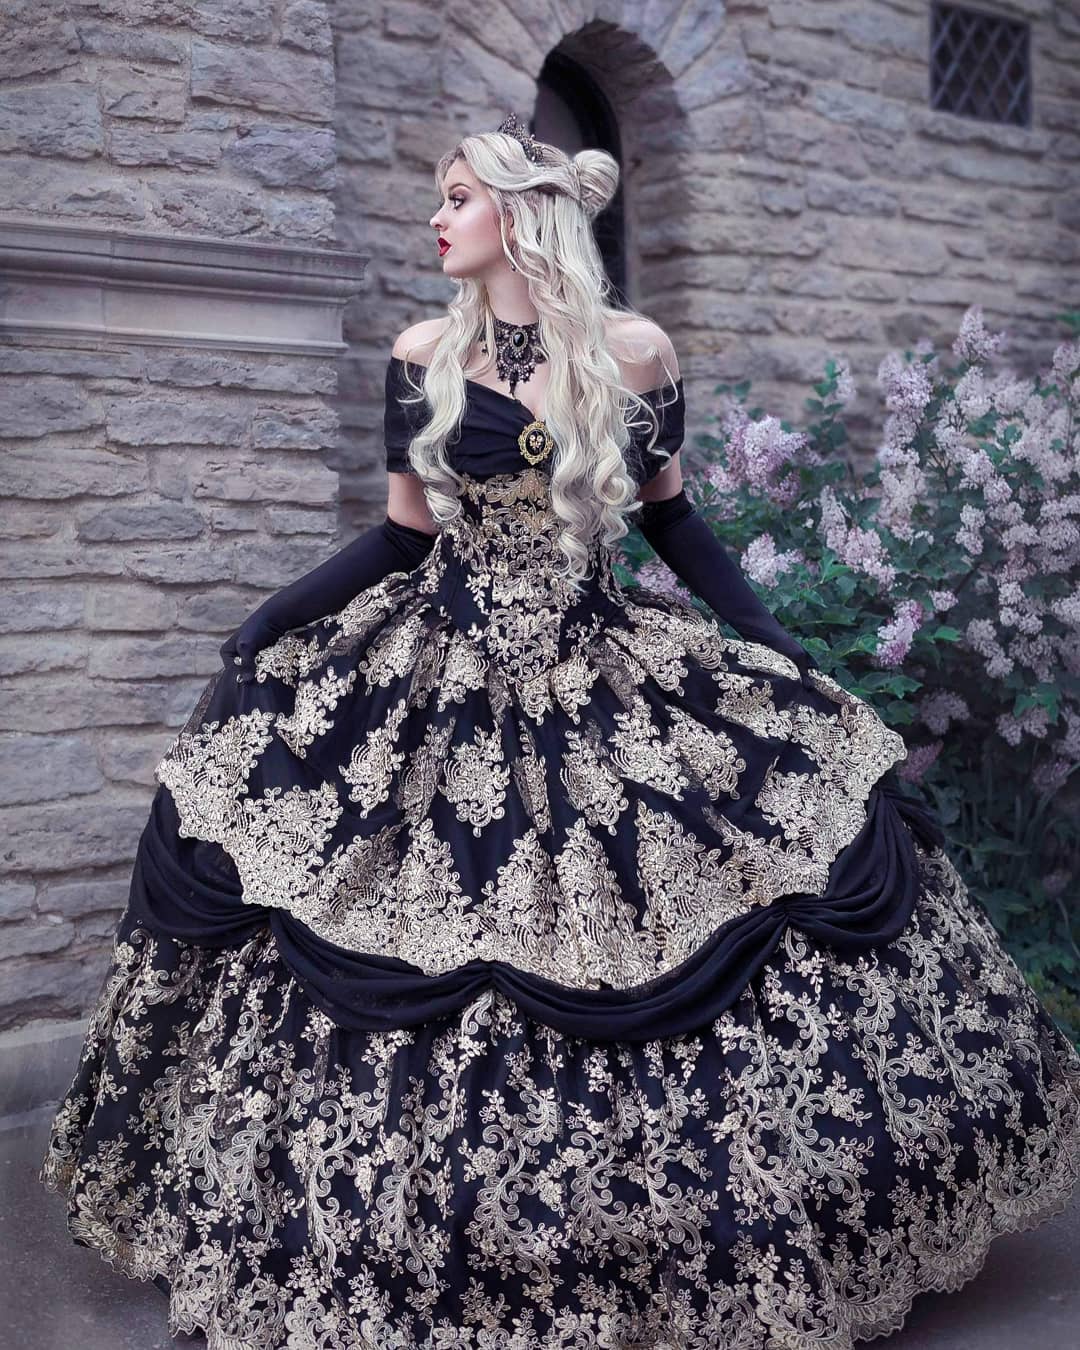 Amethyst Majestica Palace Gown | gothic wedding gown Gallery Serpentine